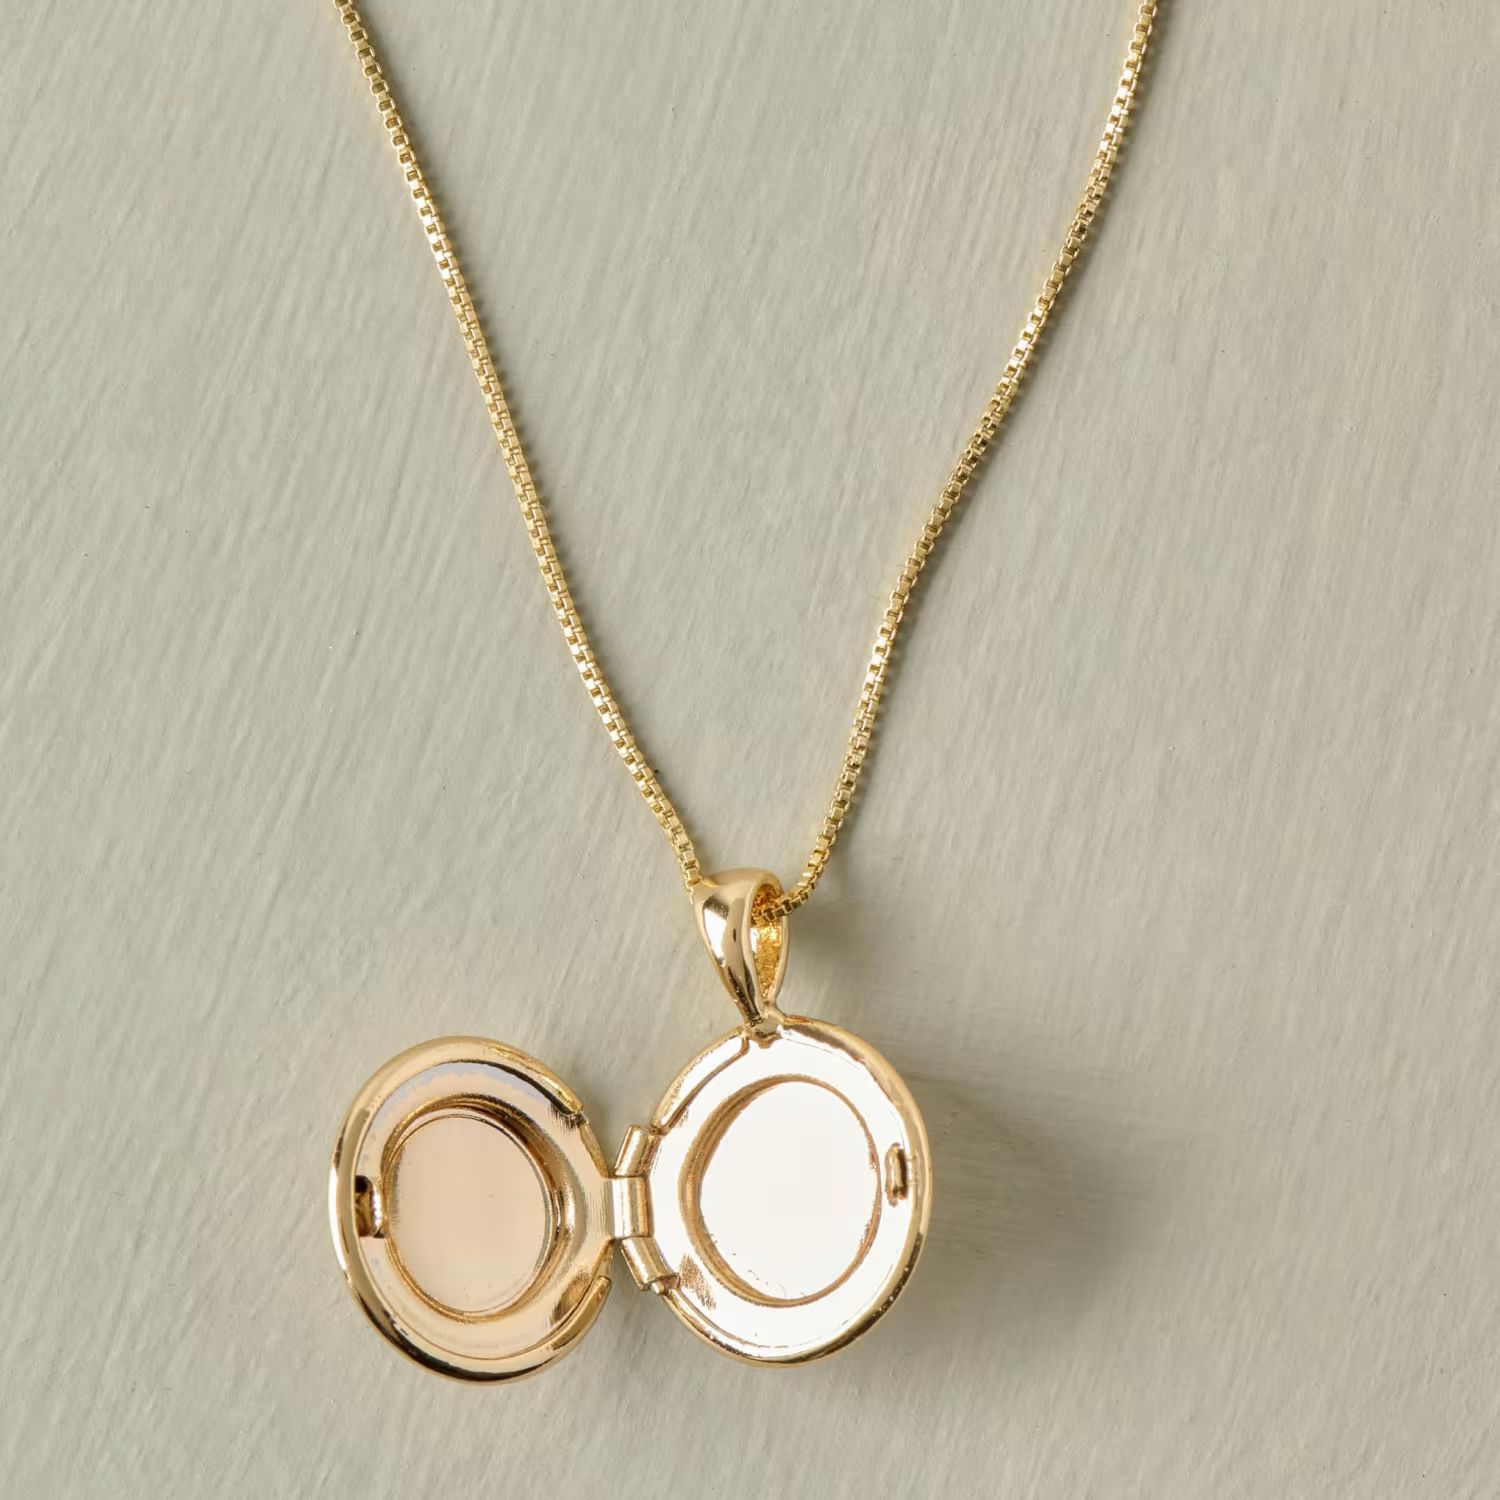 Etched Locket Gold Chain Necklace | Magnolia